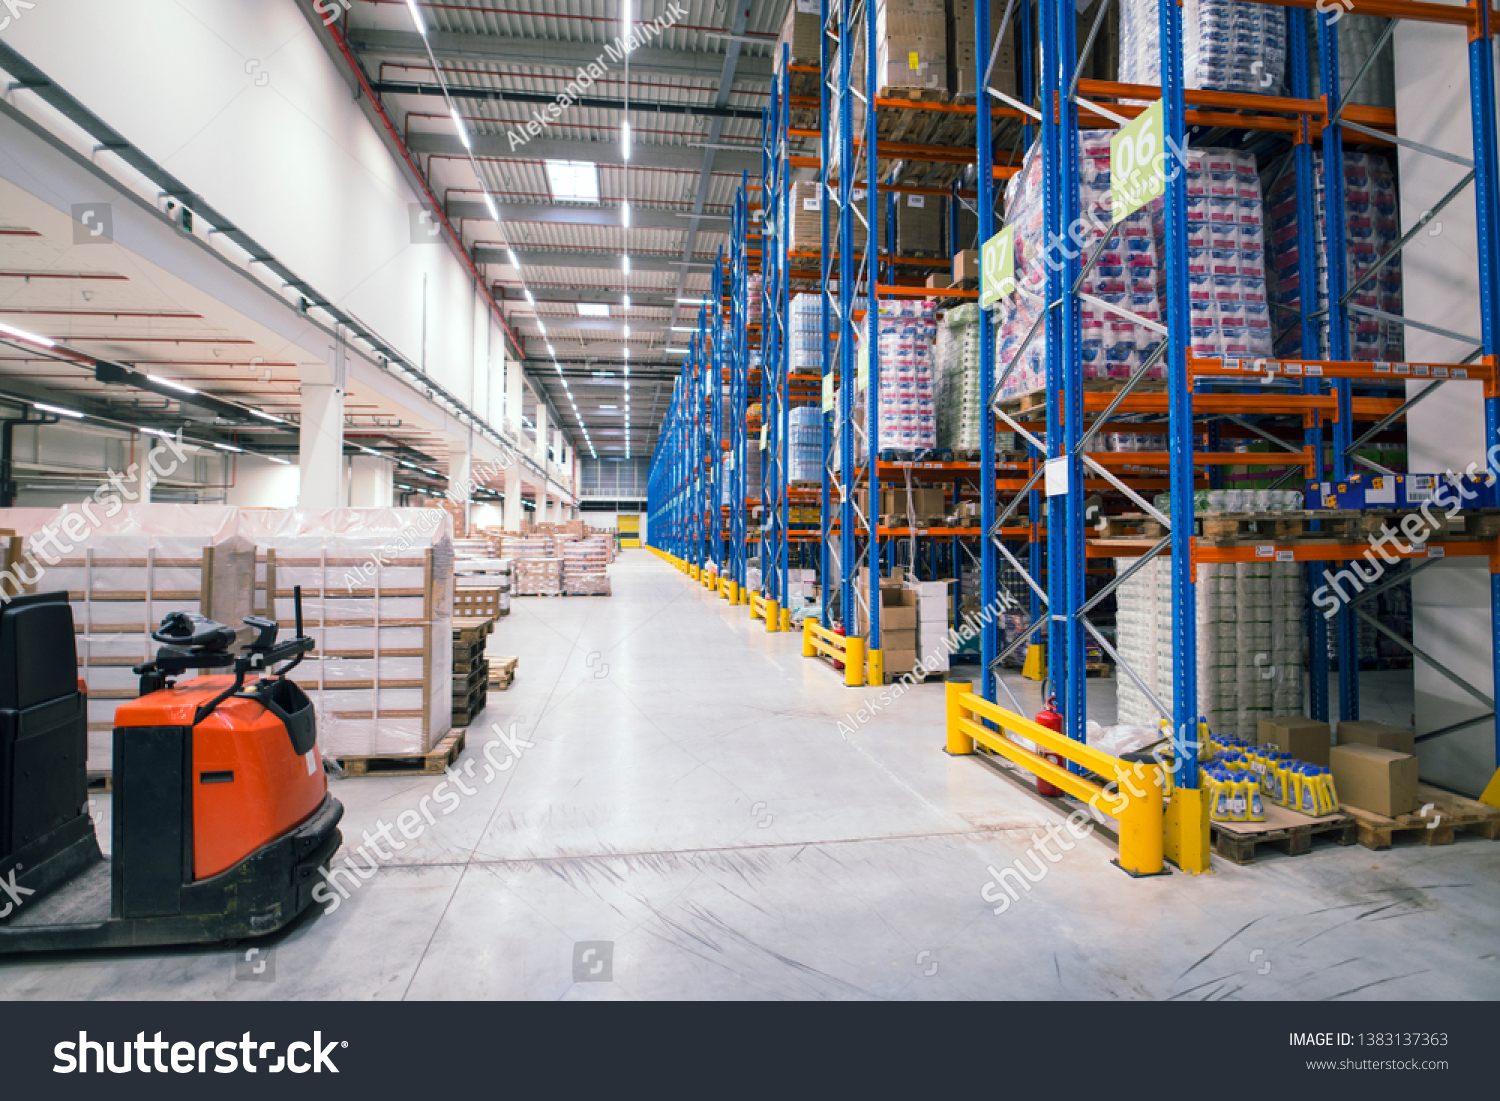 Warehouse storage facility interior. Large distribution center with shelves full of palette boxes and forklift machine. #1383137363